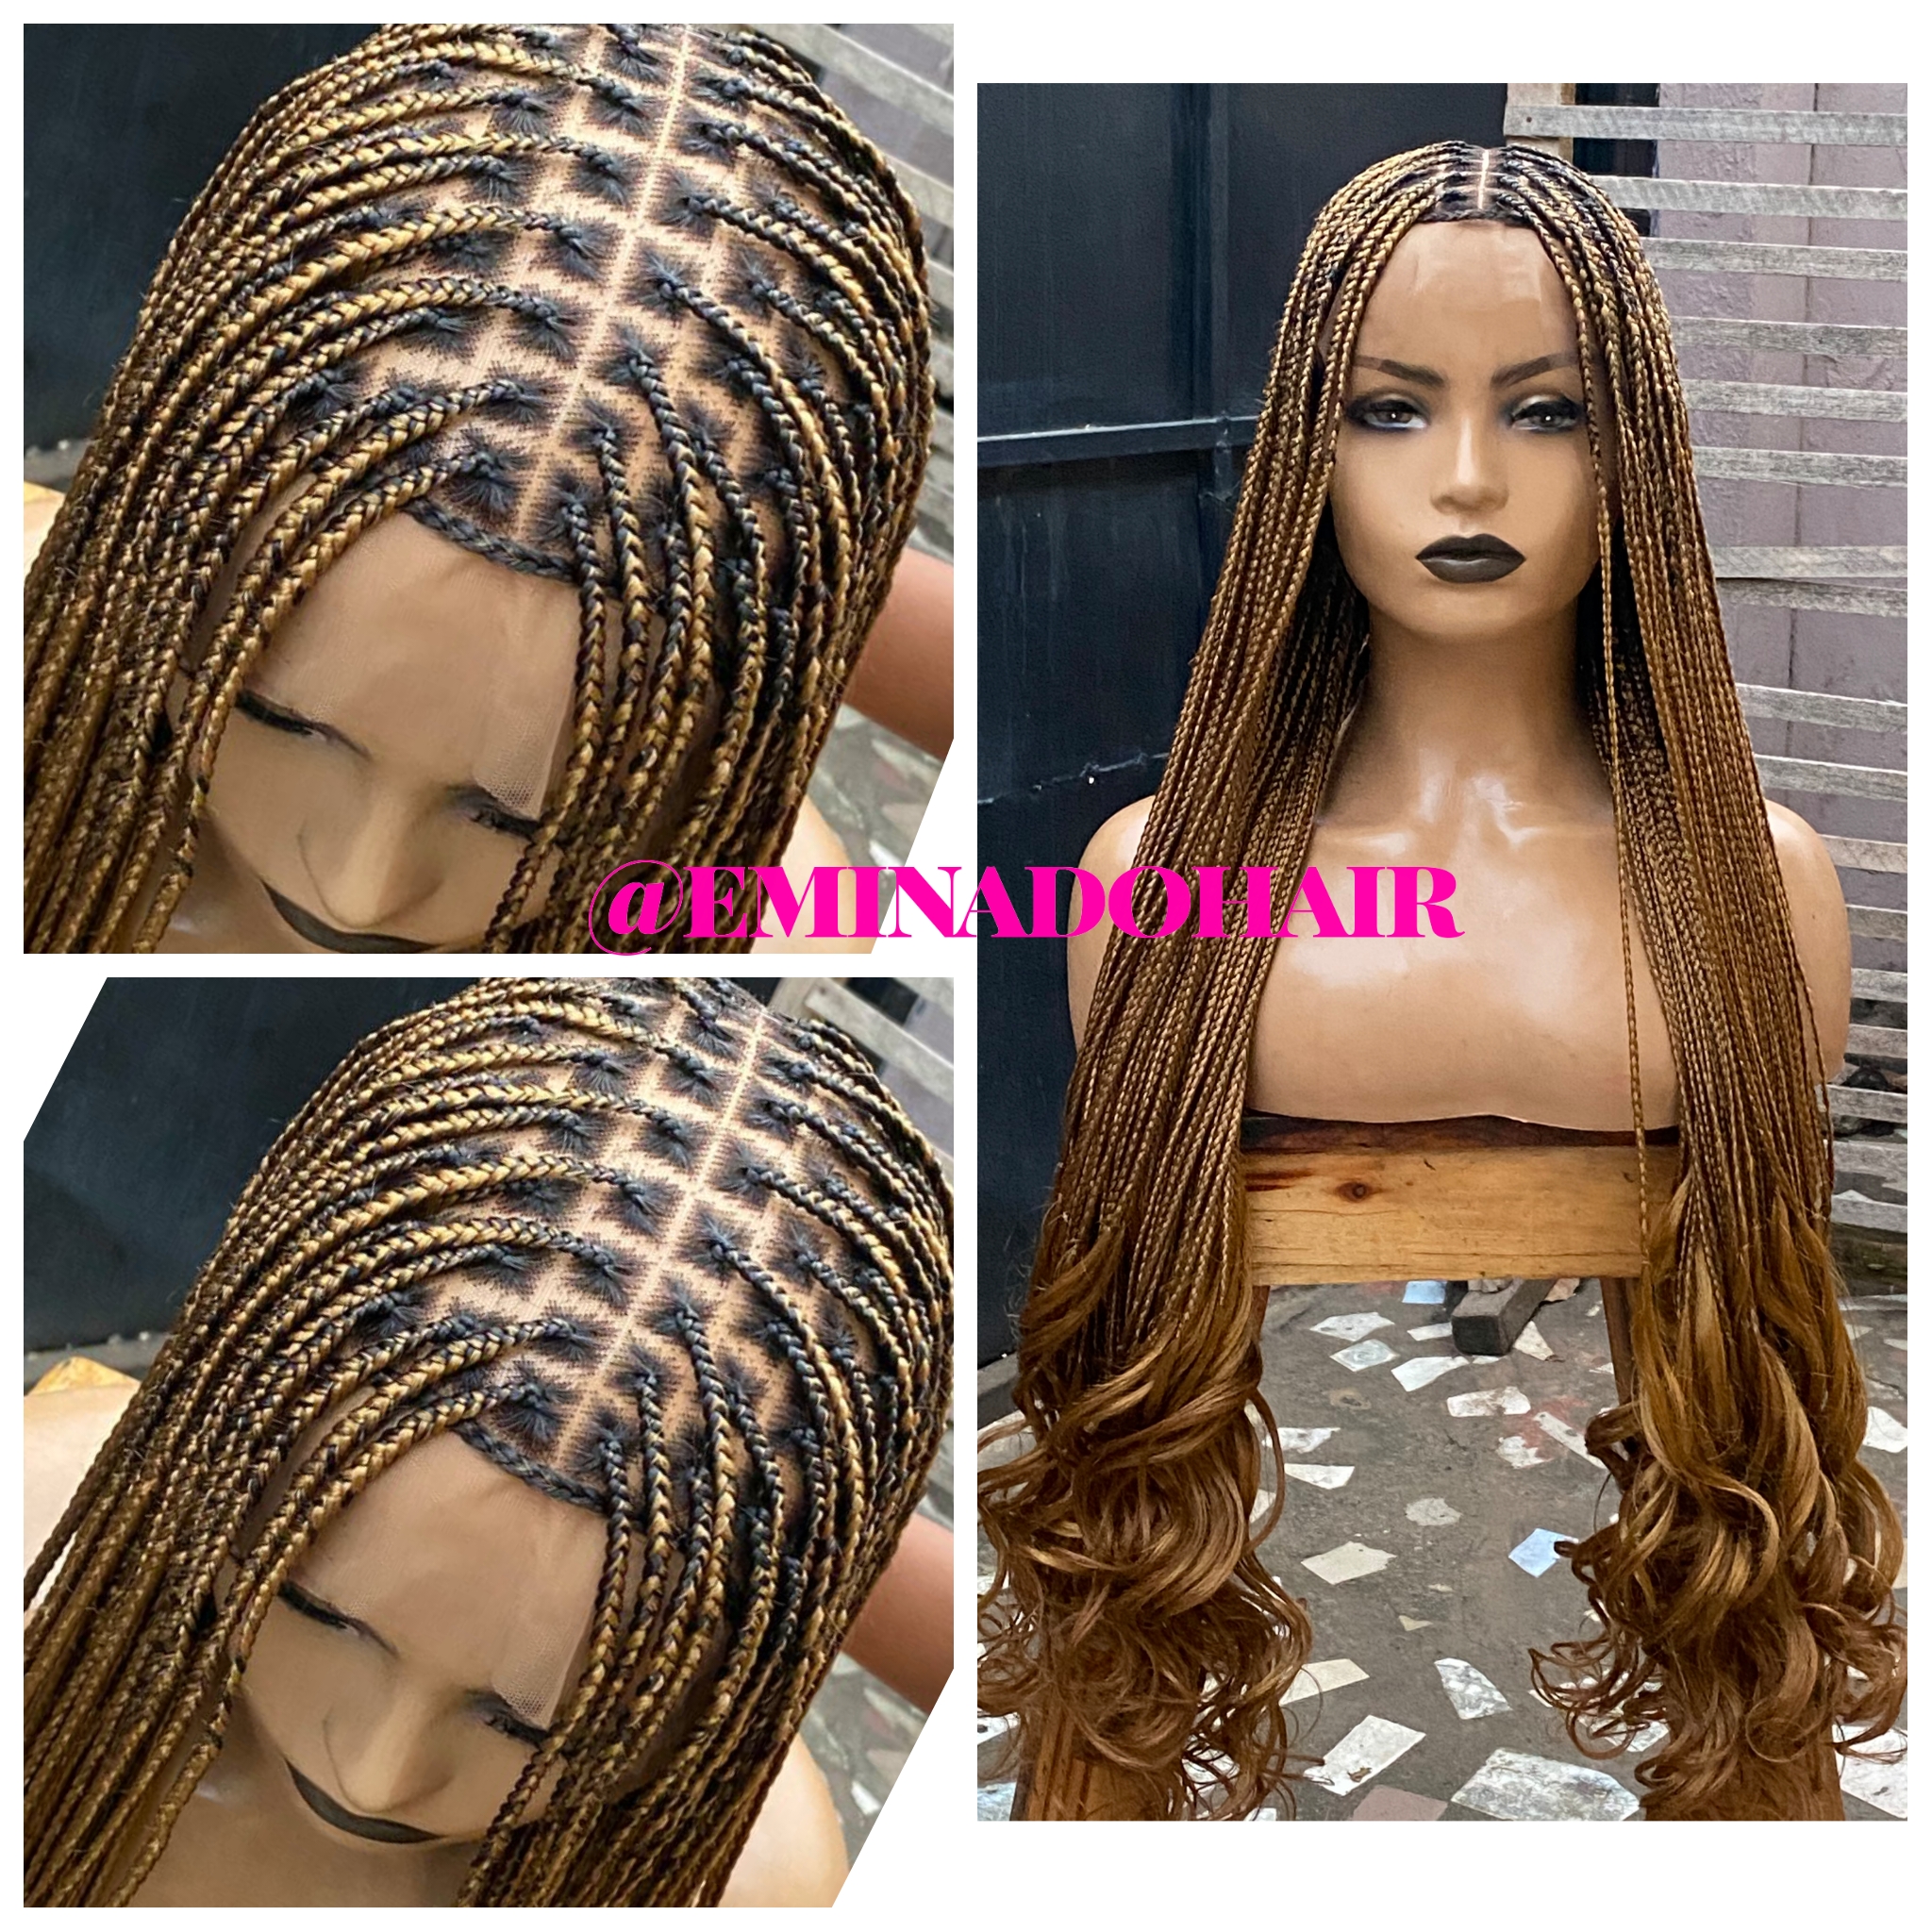 Bouncy braided wig, frontal lace wig, long curly braids wig by